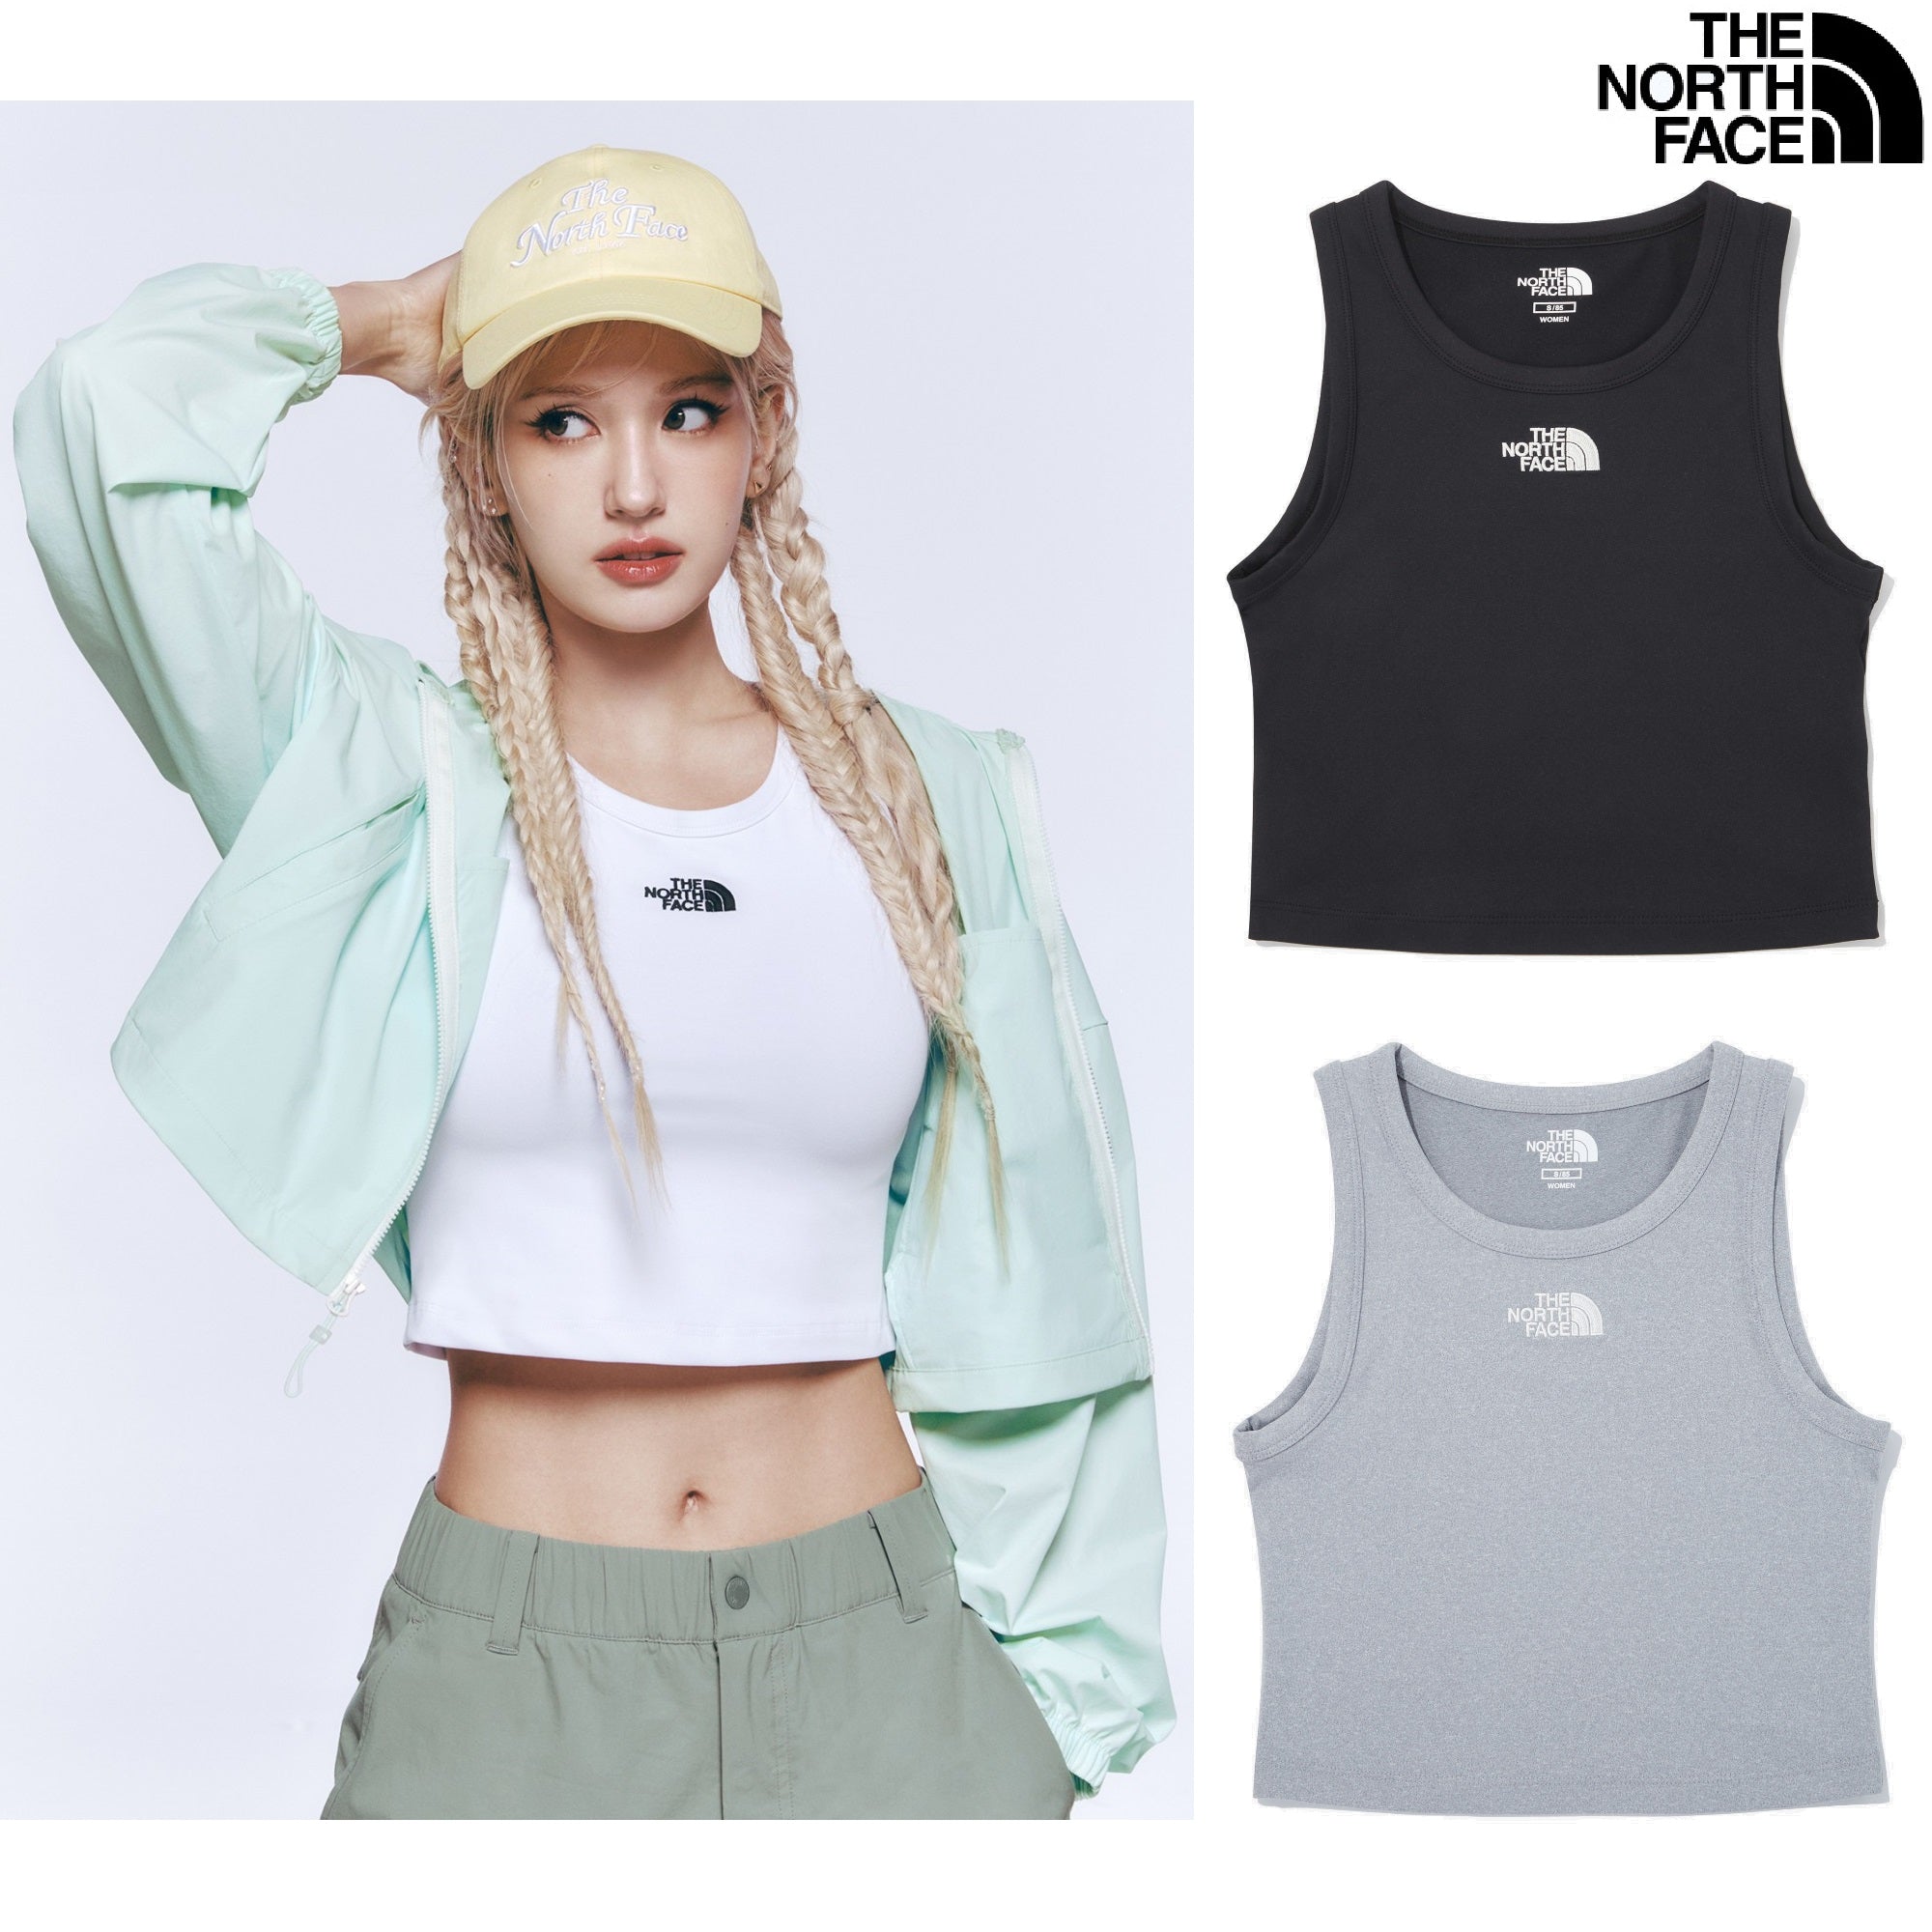 [THE NORTH FACE] WomenS AIRY TOUCH TANK TOP 3色 (NT7VQ30) 新商品 女性服 - コクモト KOCUMOTO